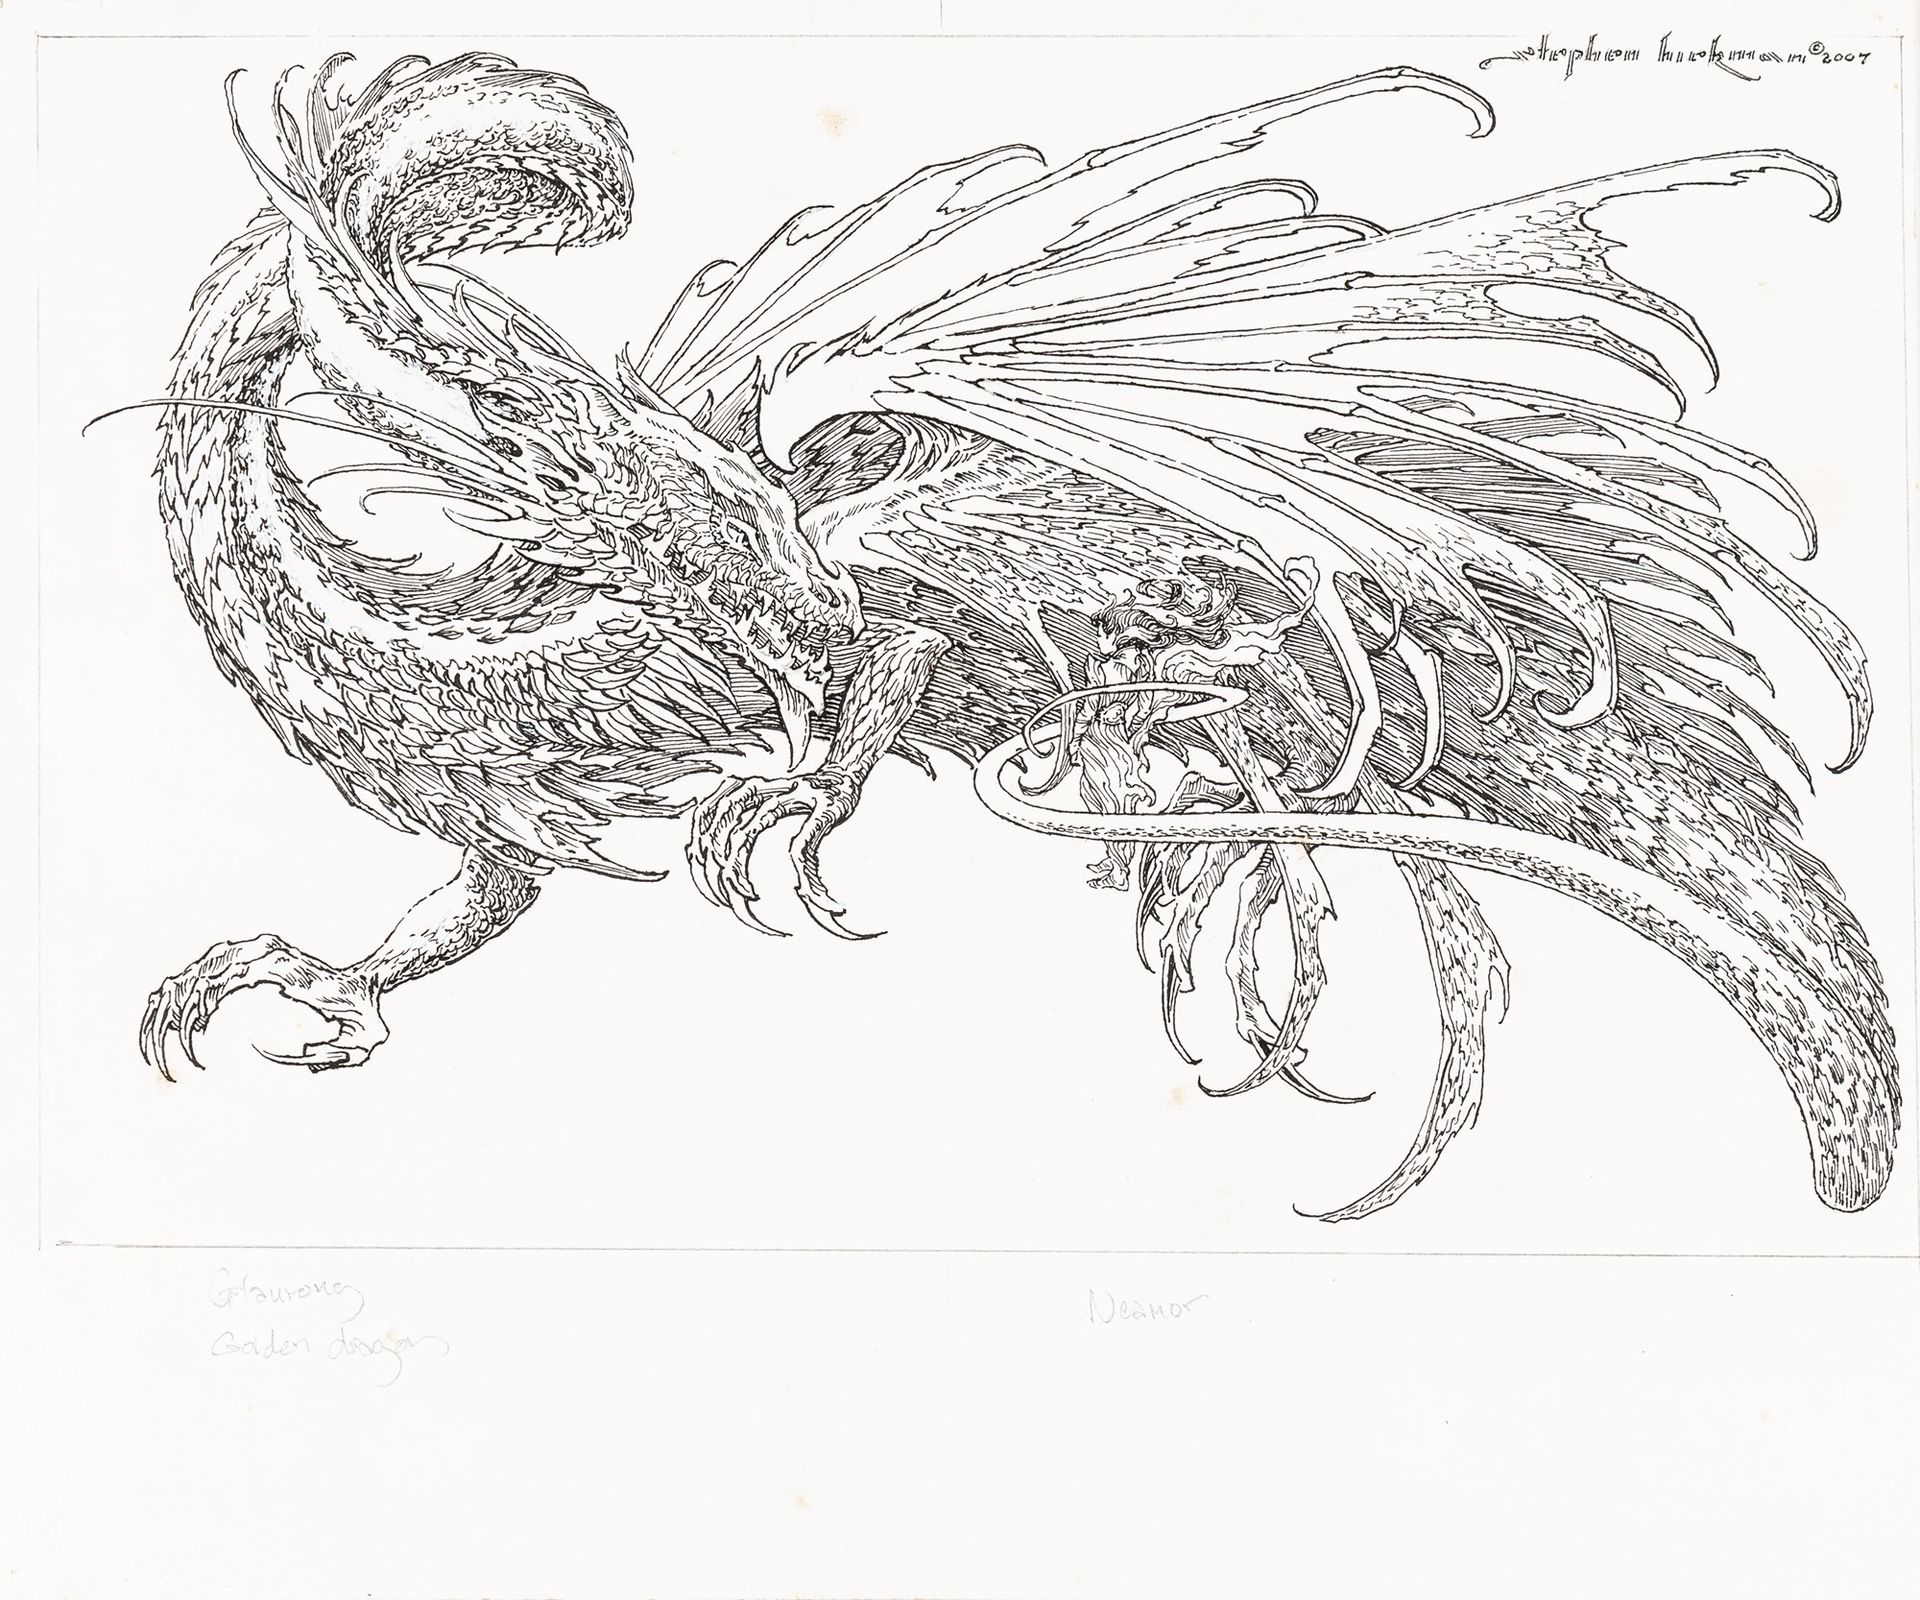 Stephen Hickman Glaurung, 2007

pencil and ink on thin cardboard
30 x 24.5 cm
Or&hellip;